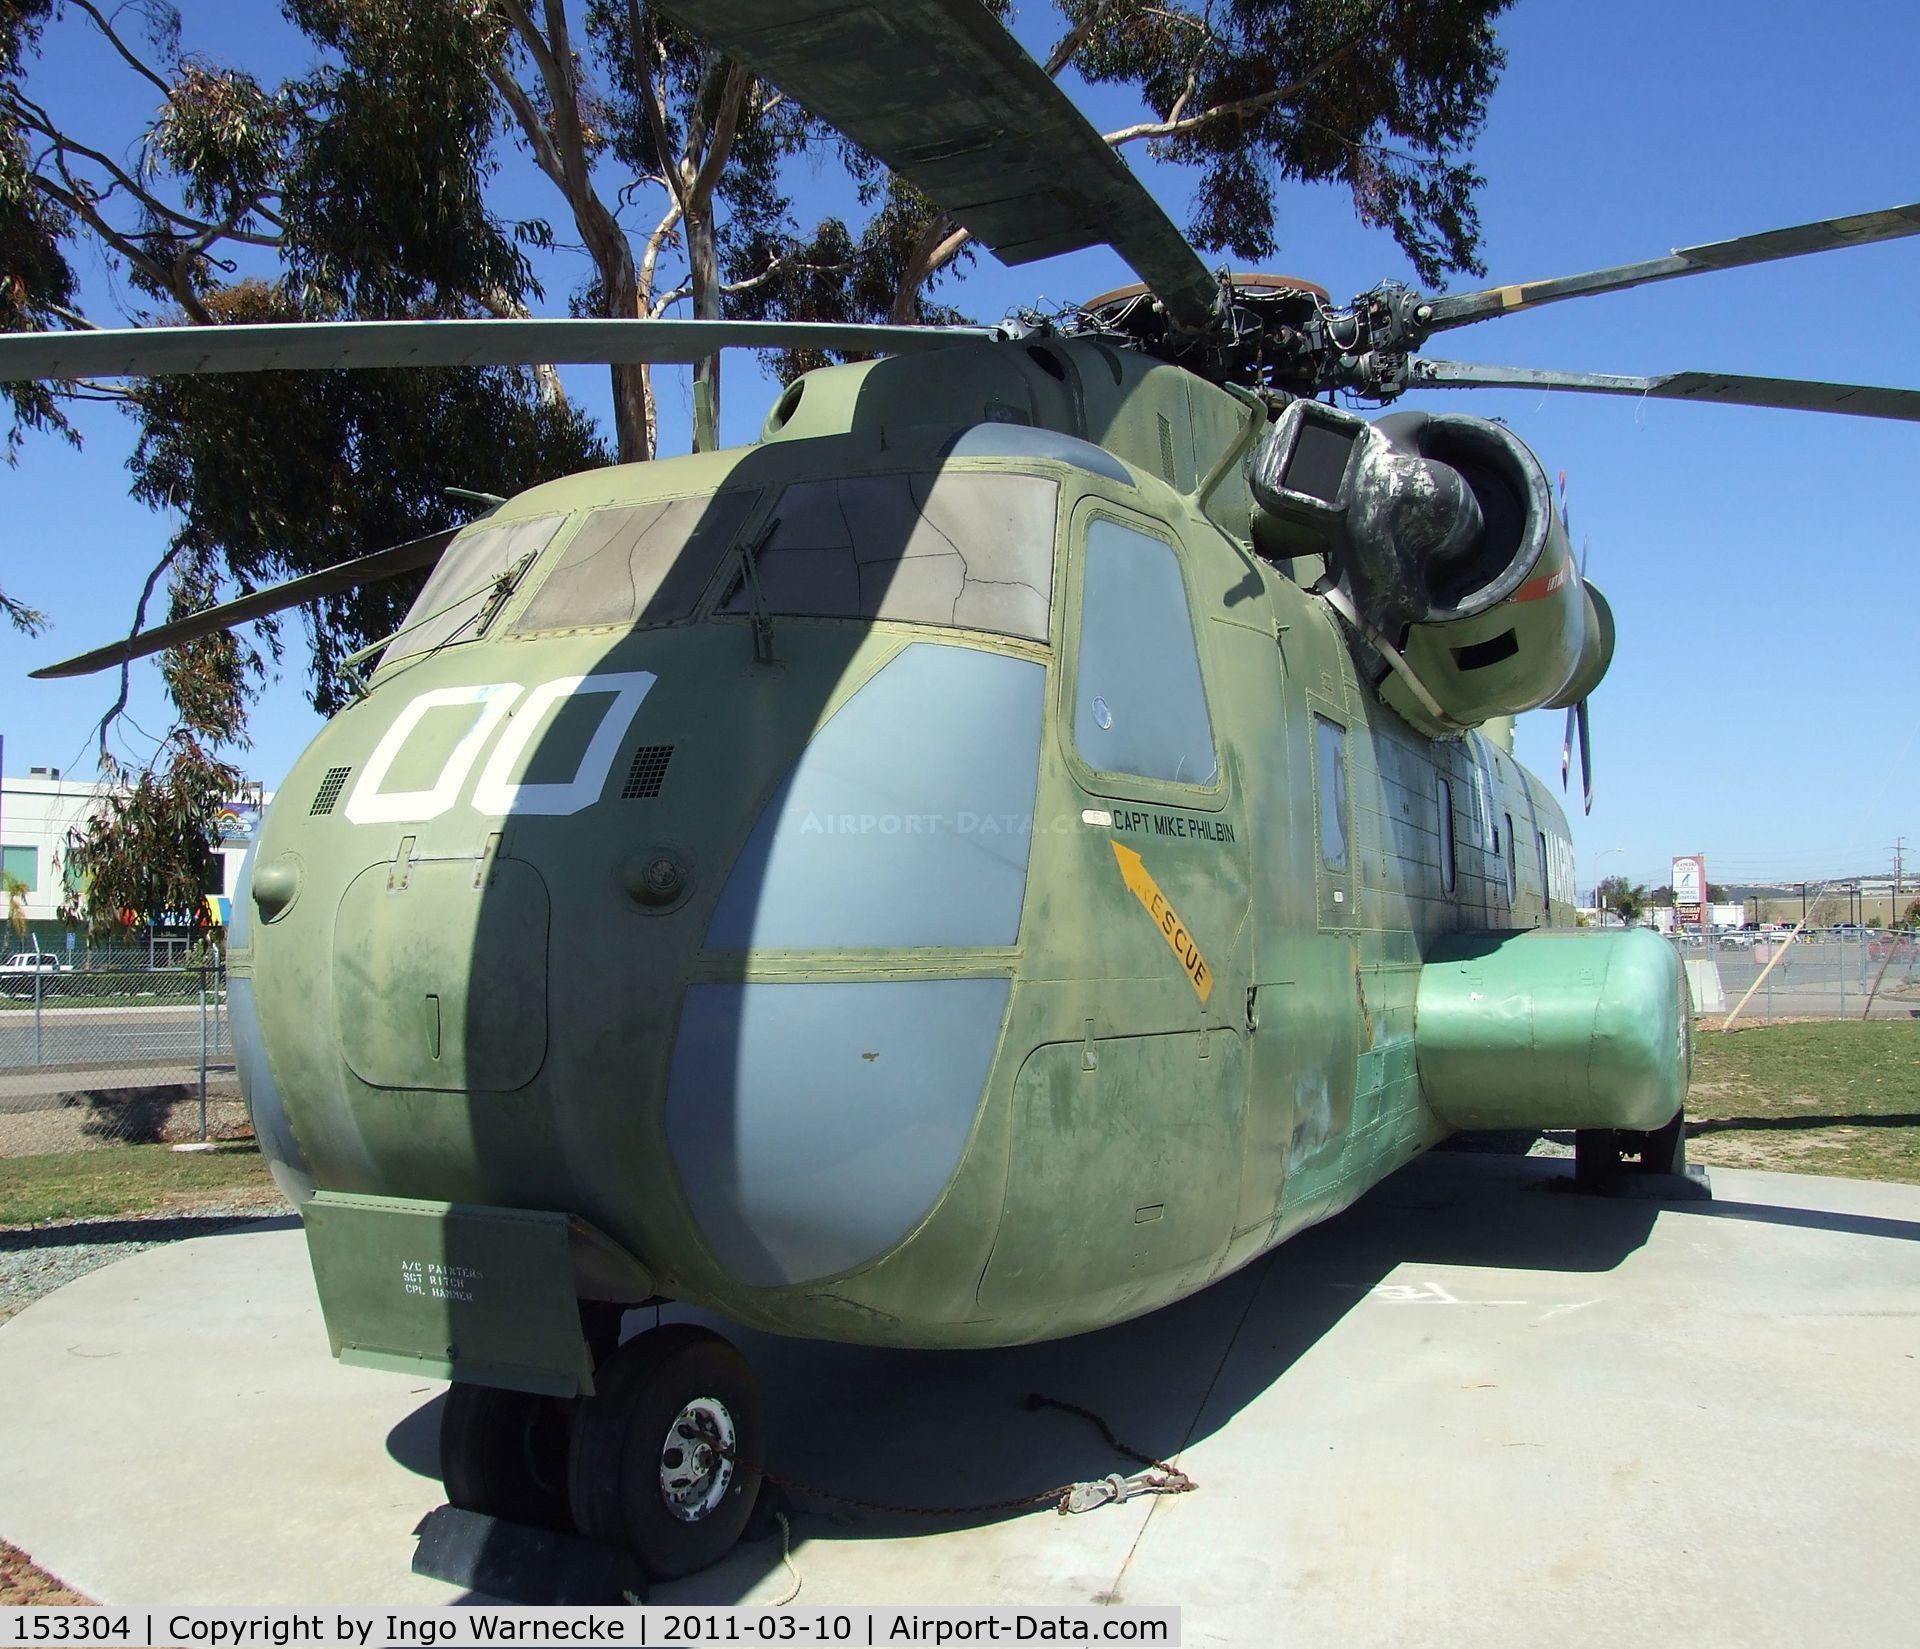 153304, Sikorsky CH-53A Sea Stallion C/N 65-081, Sikorsky CH-53A Sea Stallion at the Flying Leatherneck Aviation Museum, Miramar CA